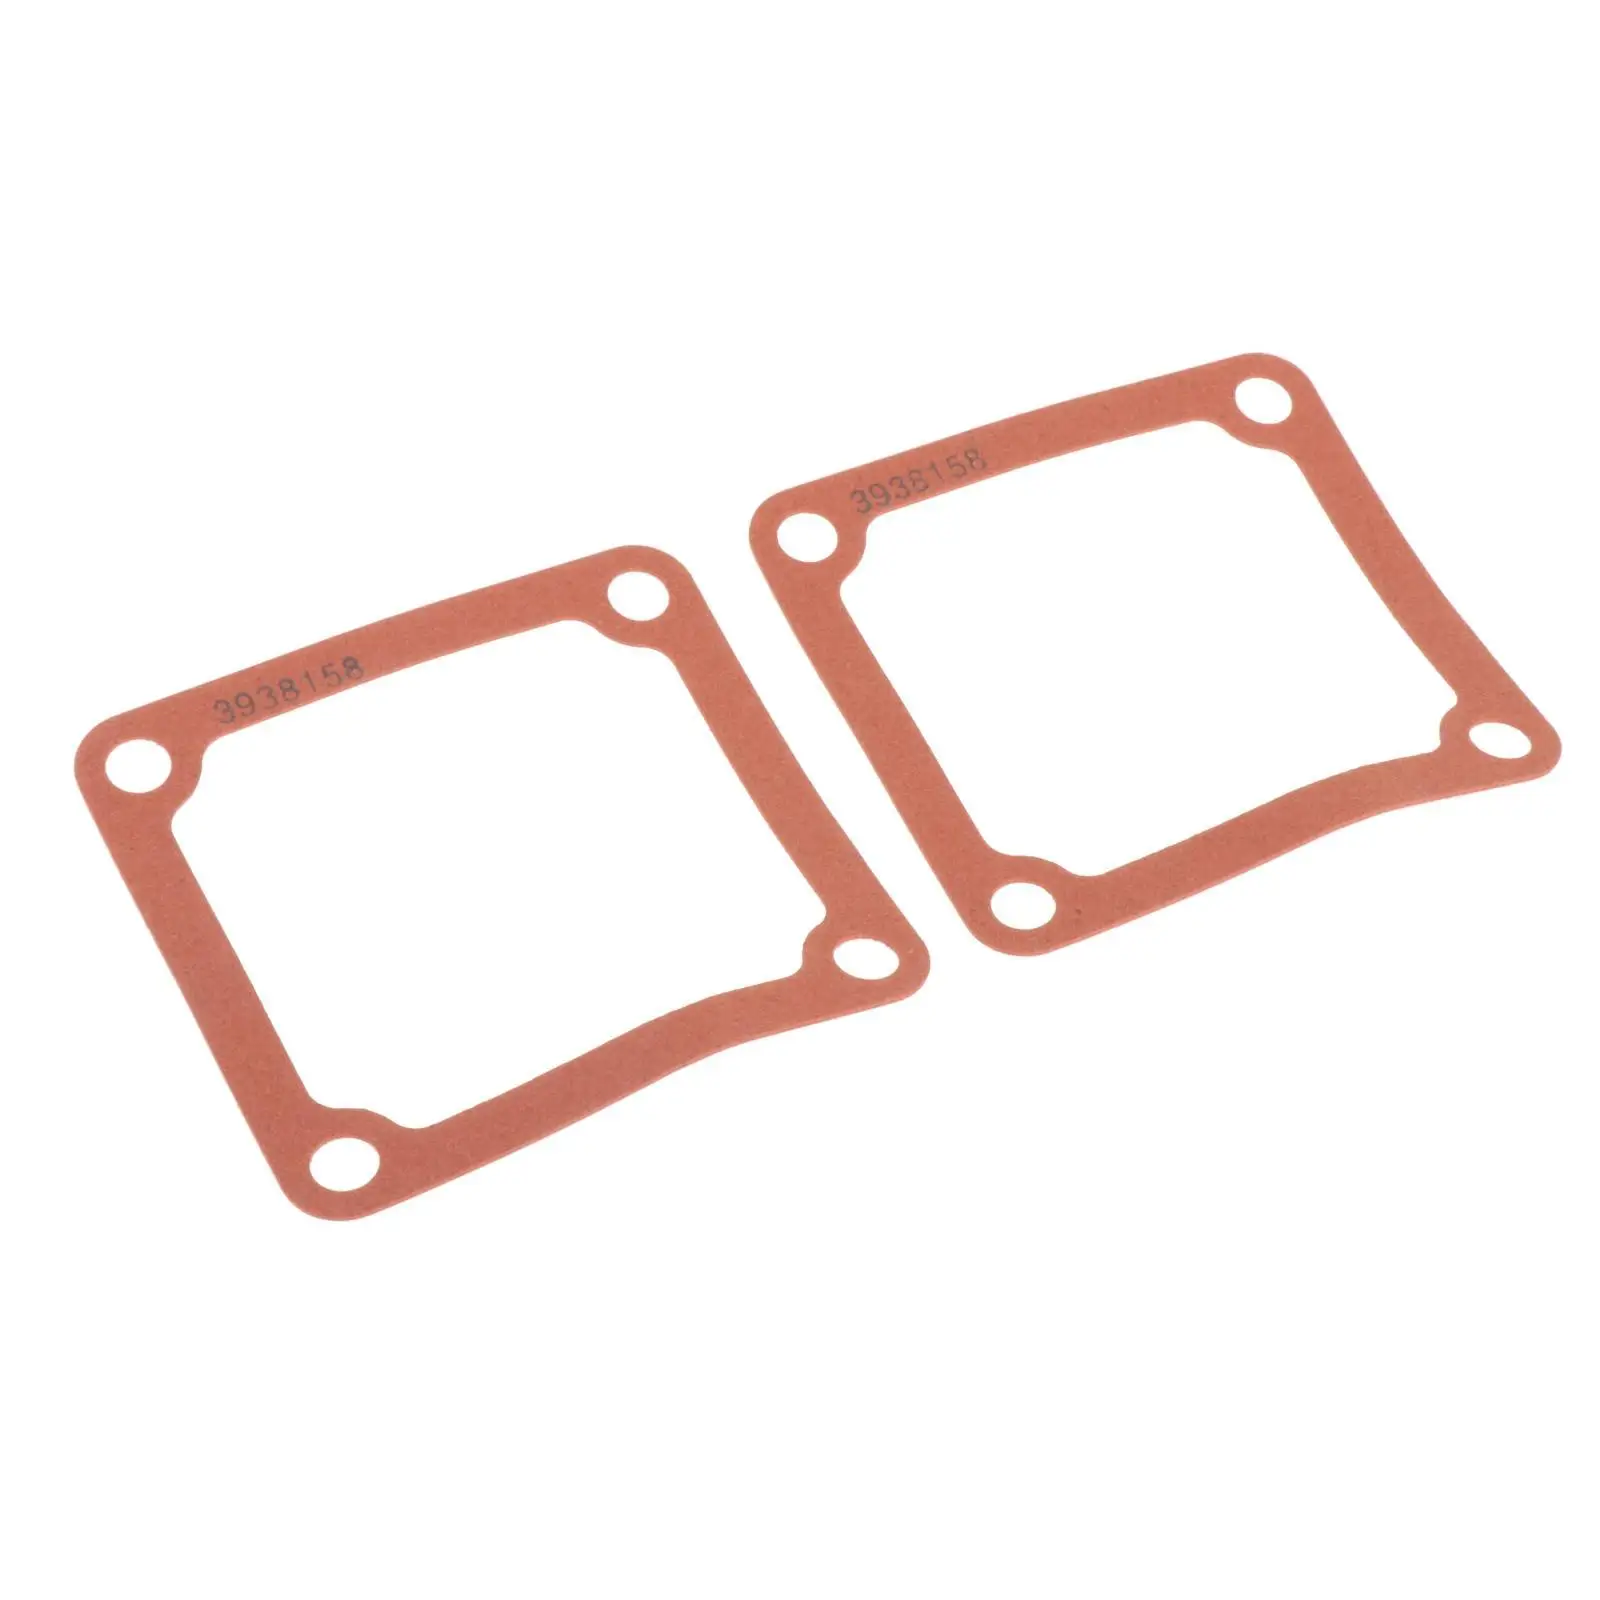 2x Gaskets Air Intake Grid Heater Spare Parts Space Replace for 5.9L